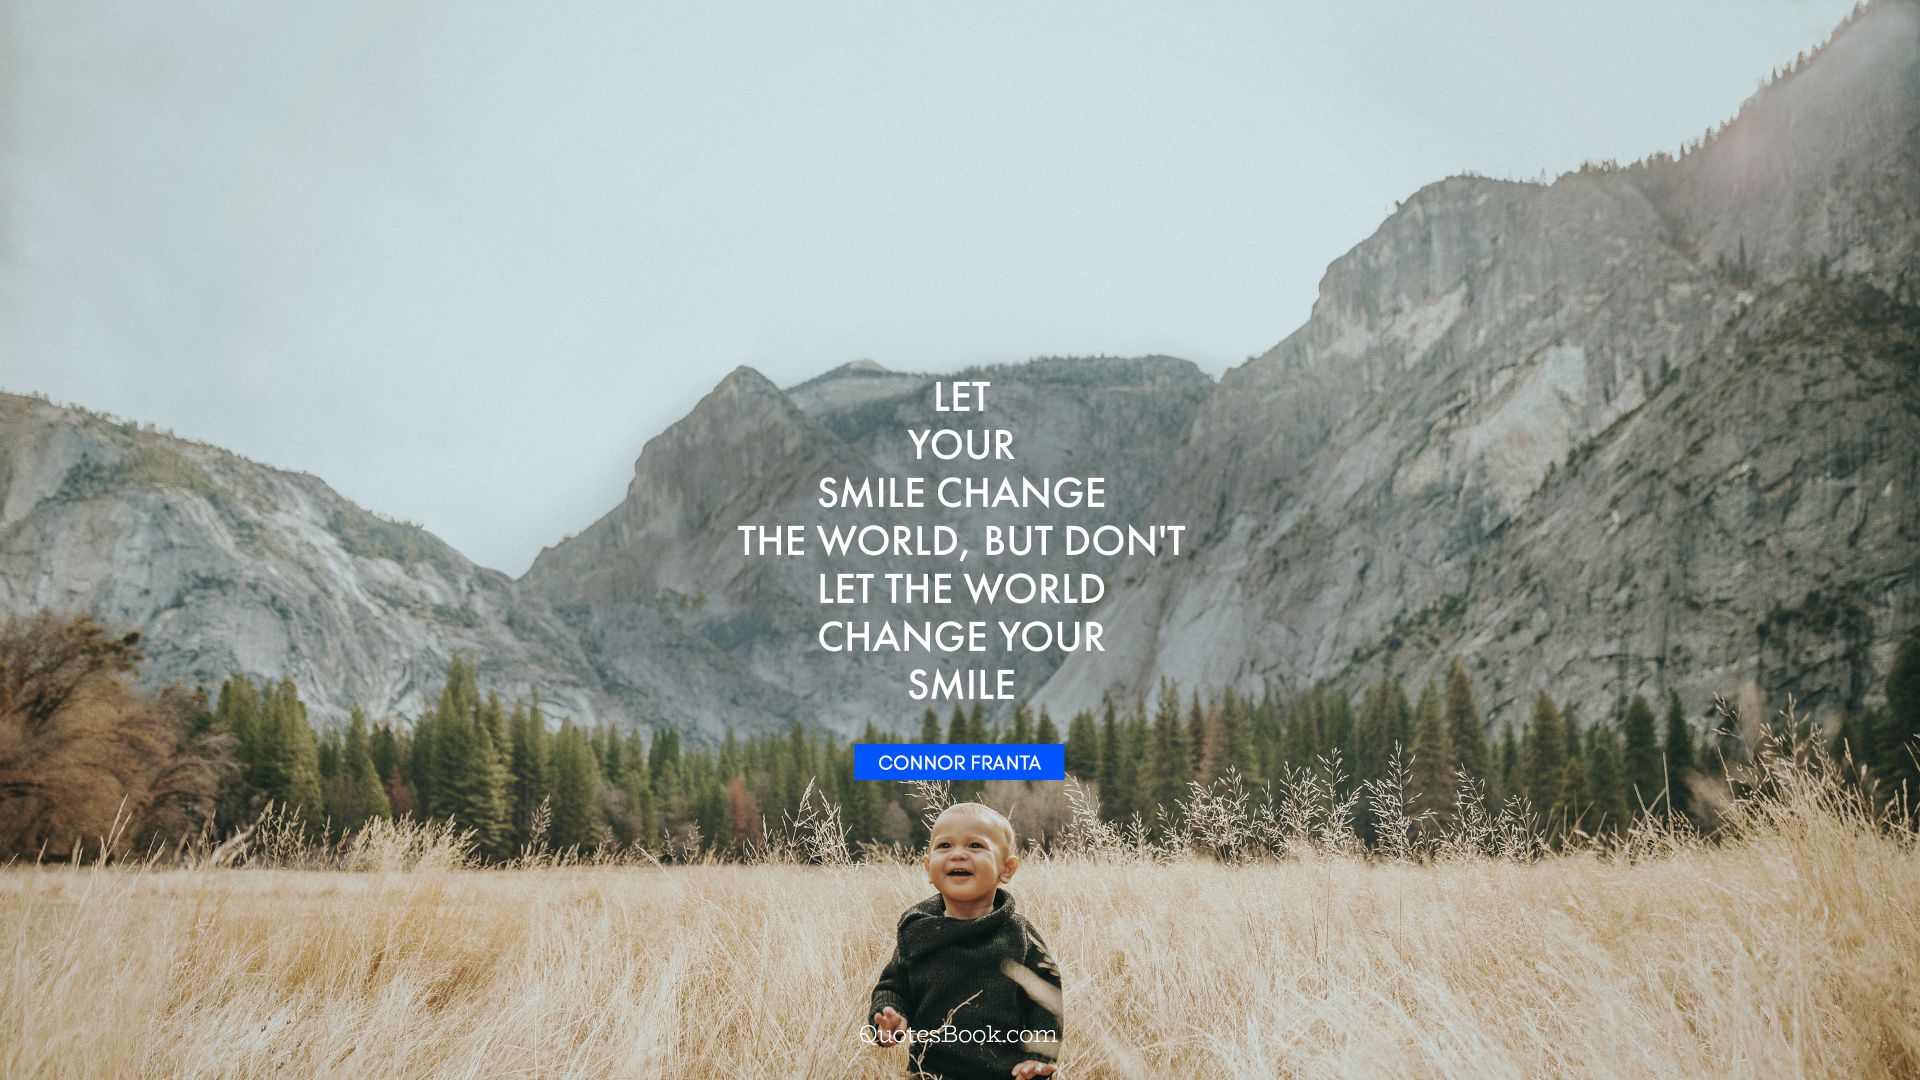 Let your smile change the world, but don't let the world change your smile. - Quote by Connor Franta